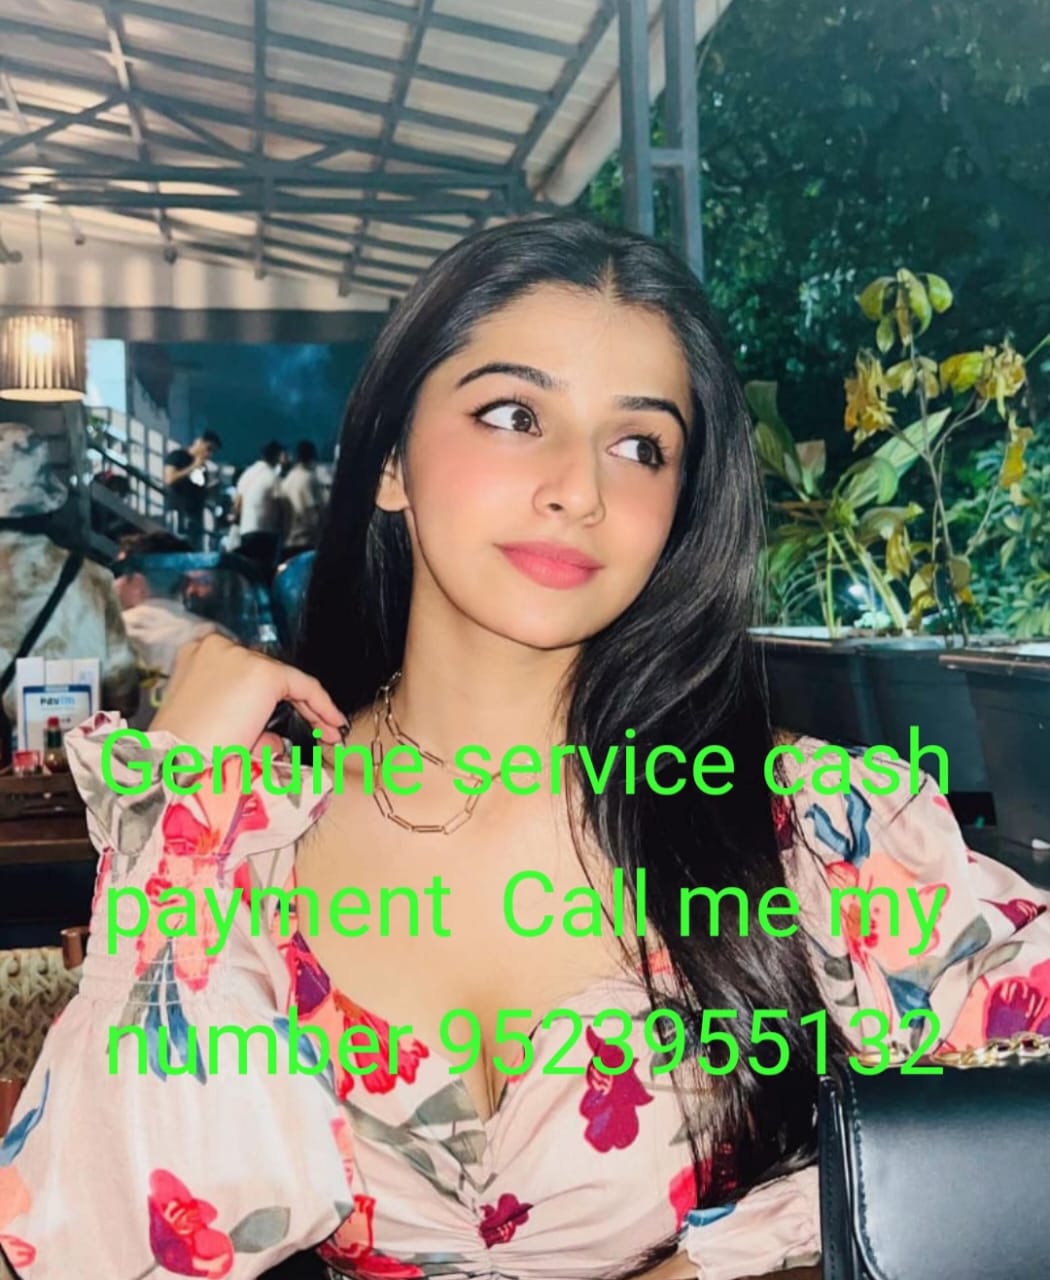 Call❤️☎️ ☎️Low price❤️ call girl % TRUSTED❤️